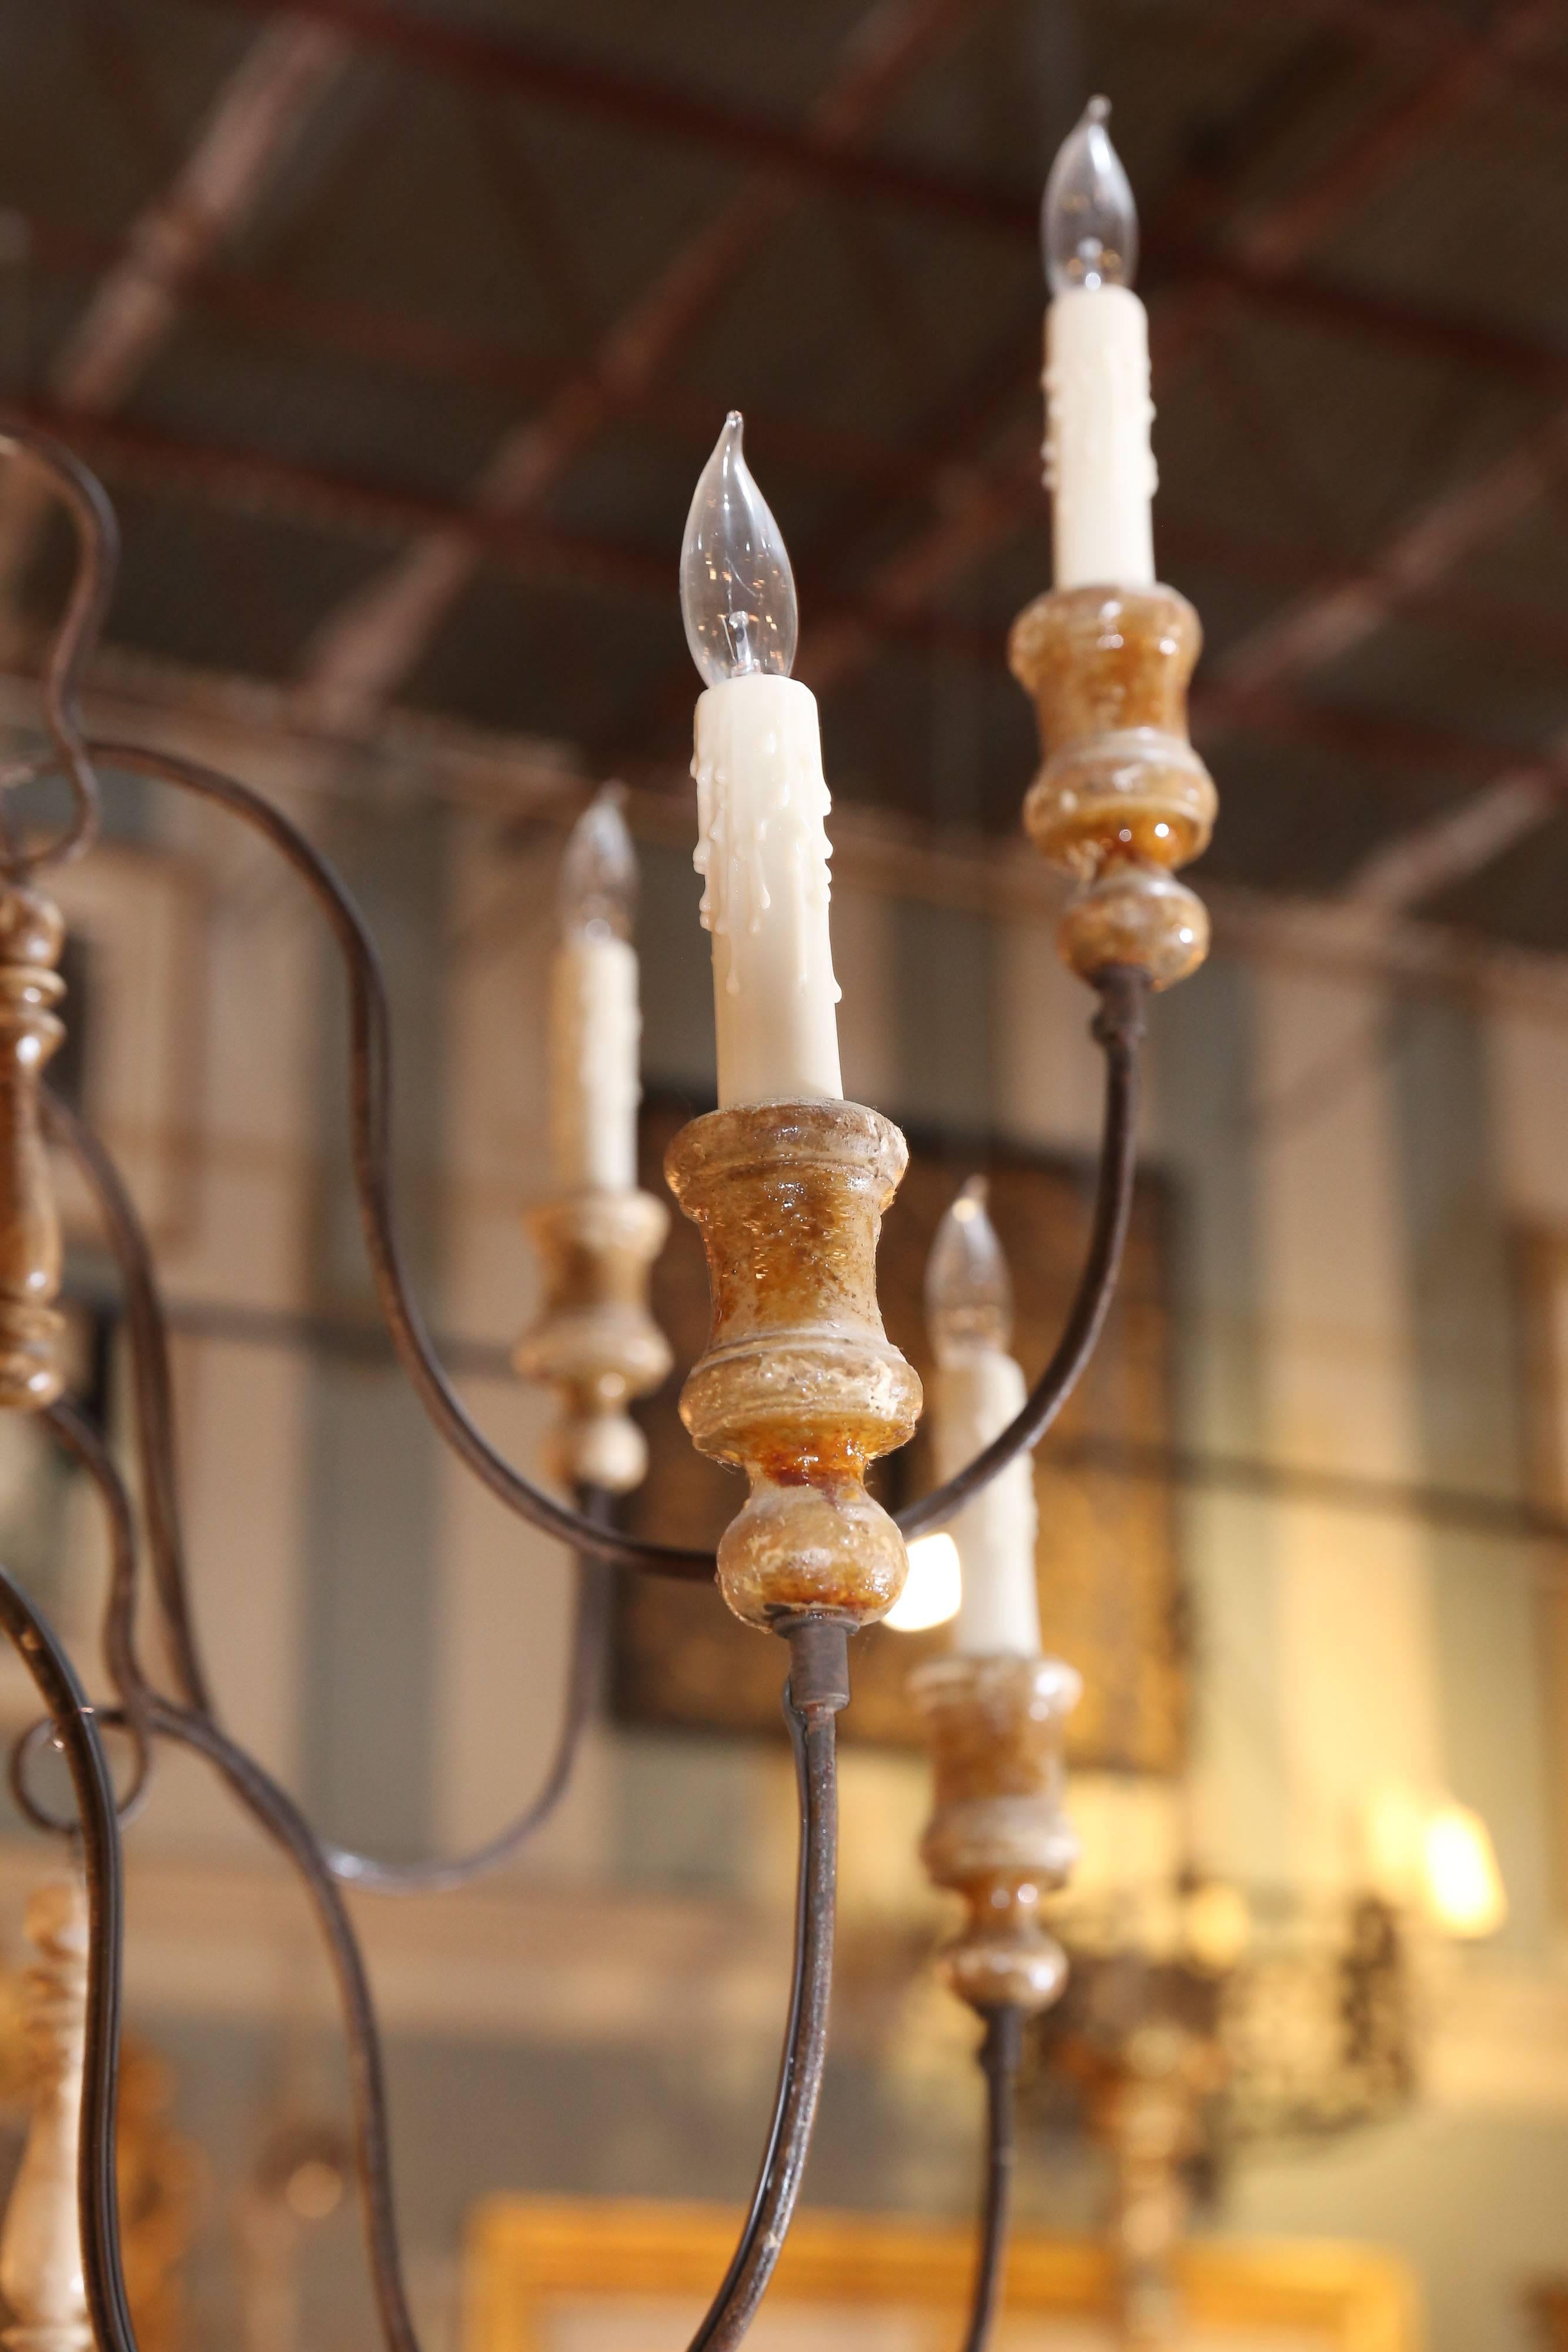 Large white-washed Swedish chandelier with carved candleholders, tassels and center pole.

There are two decorative metal pieces of trim dividing the center pole.

Chandelier arms are metal with wooden beads.